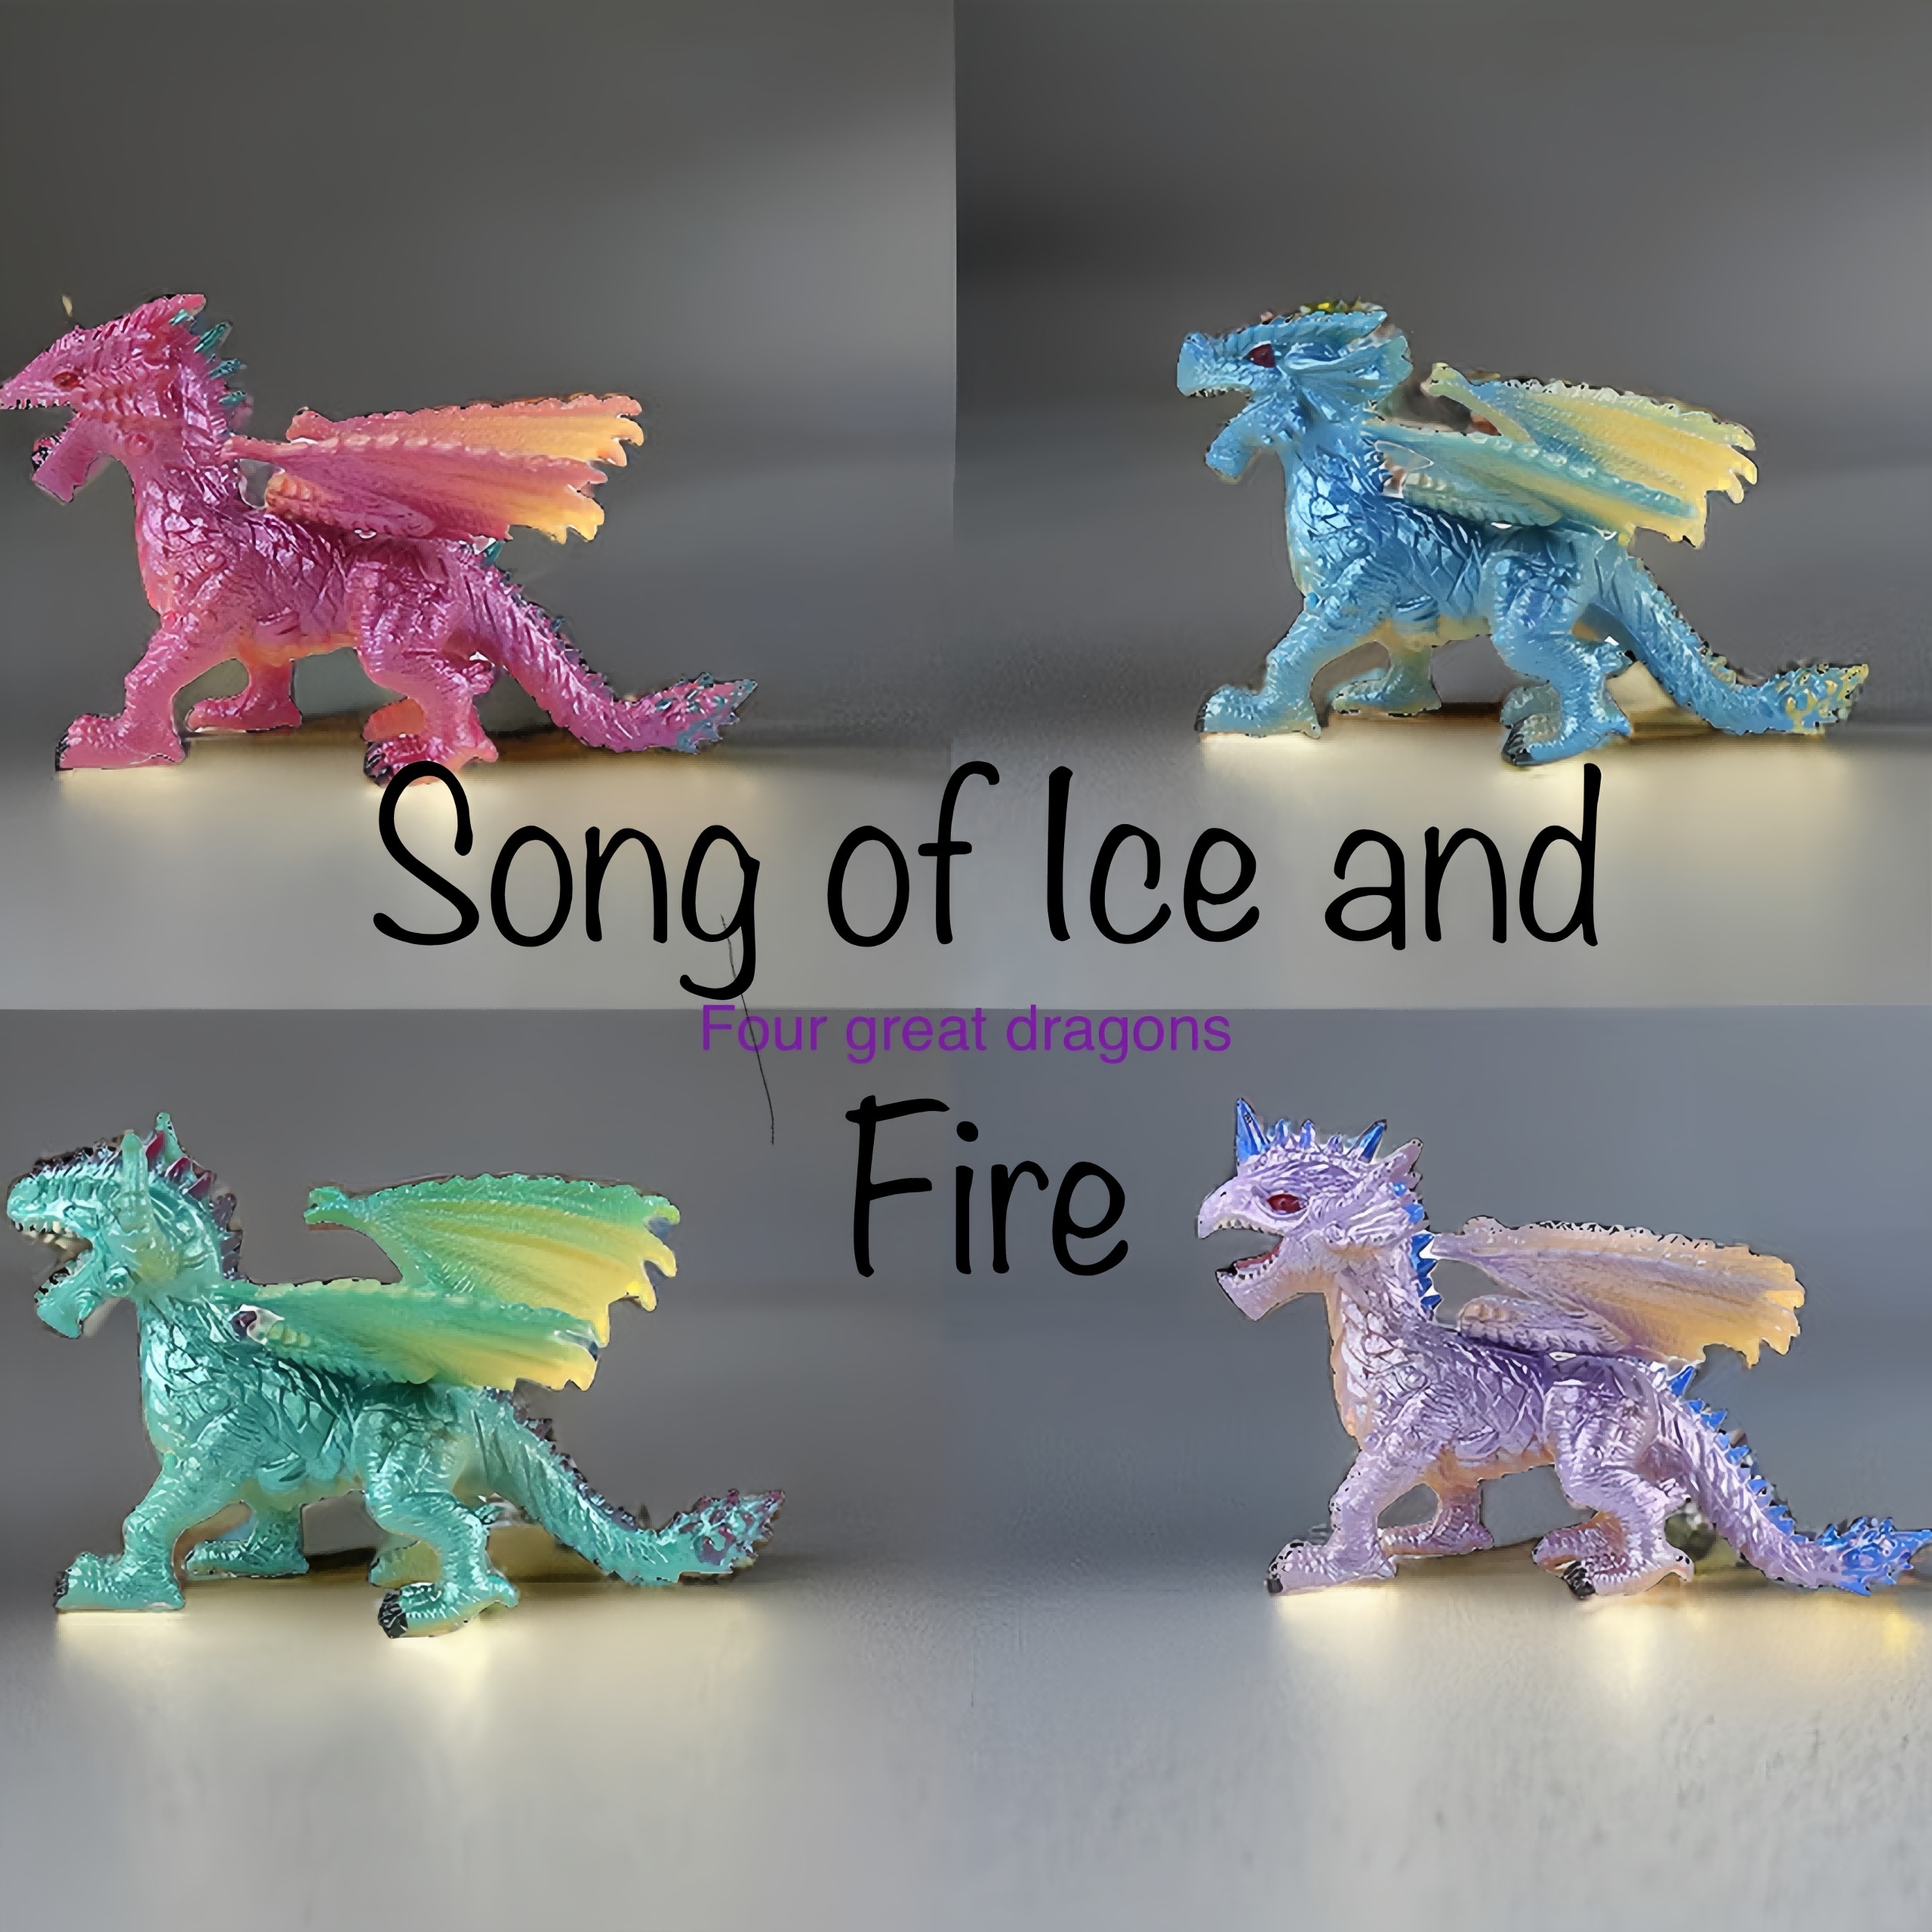 Addcean 3D Printed Dragon, 3D Printed Crystal Dragon Articulated Dragon,  Home Office Desktop Ornament Fish Tank Landscape, Adults Fidget Toys for